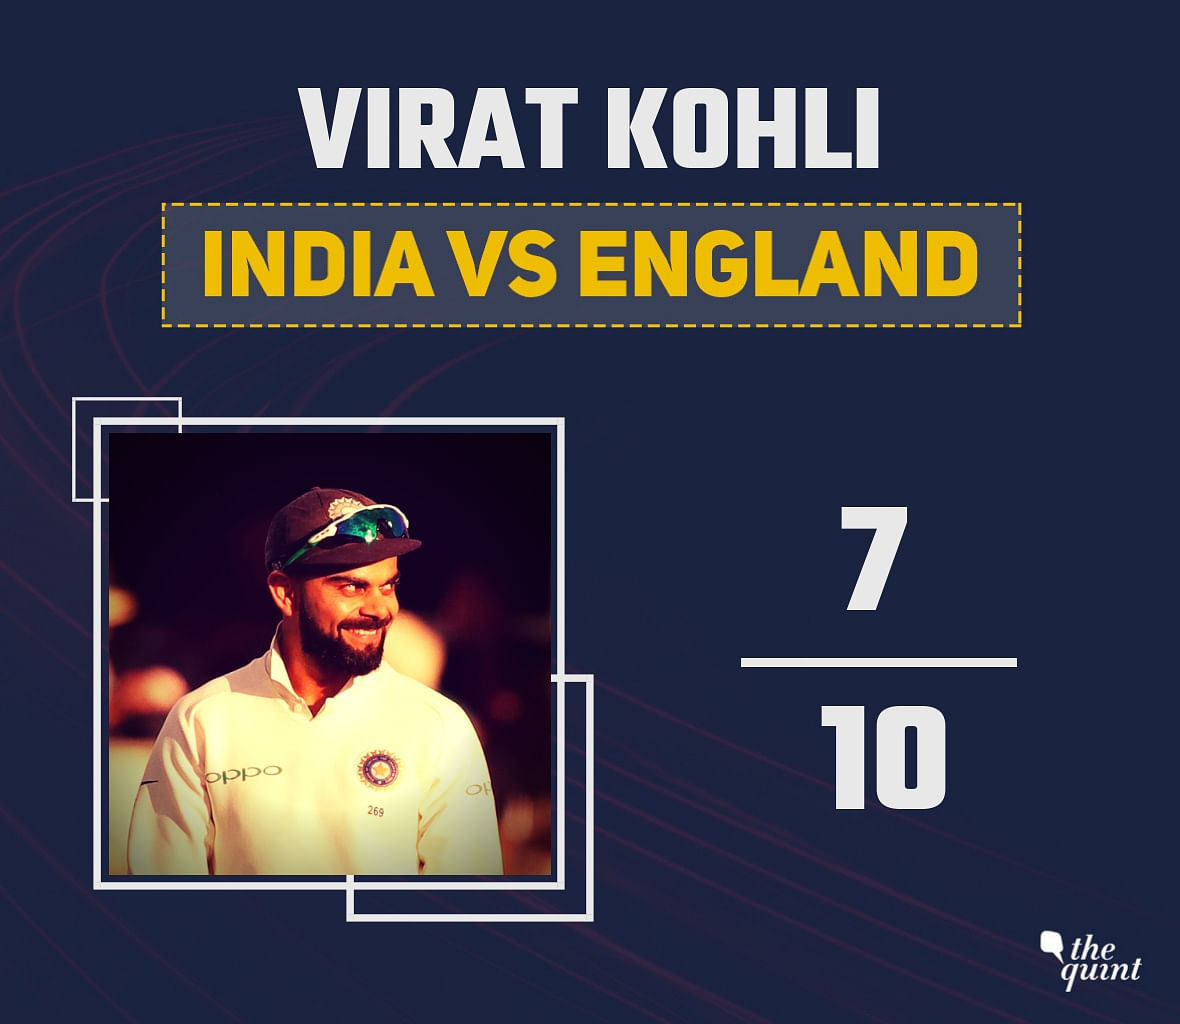 How did Virat Kohli & co fare in their 1-4 loss to England in the five-match Test series.